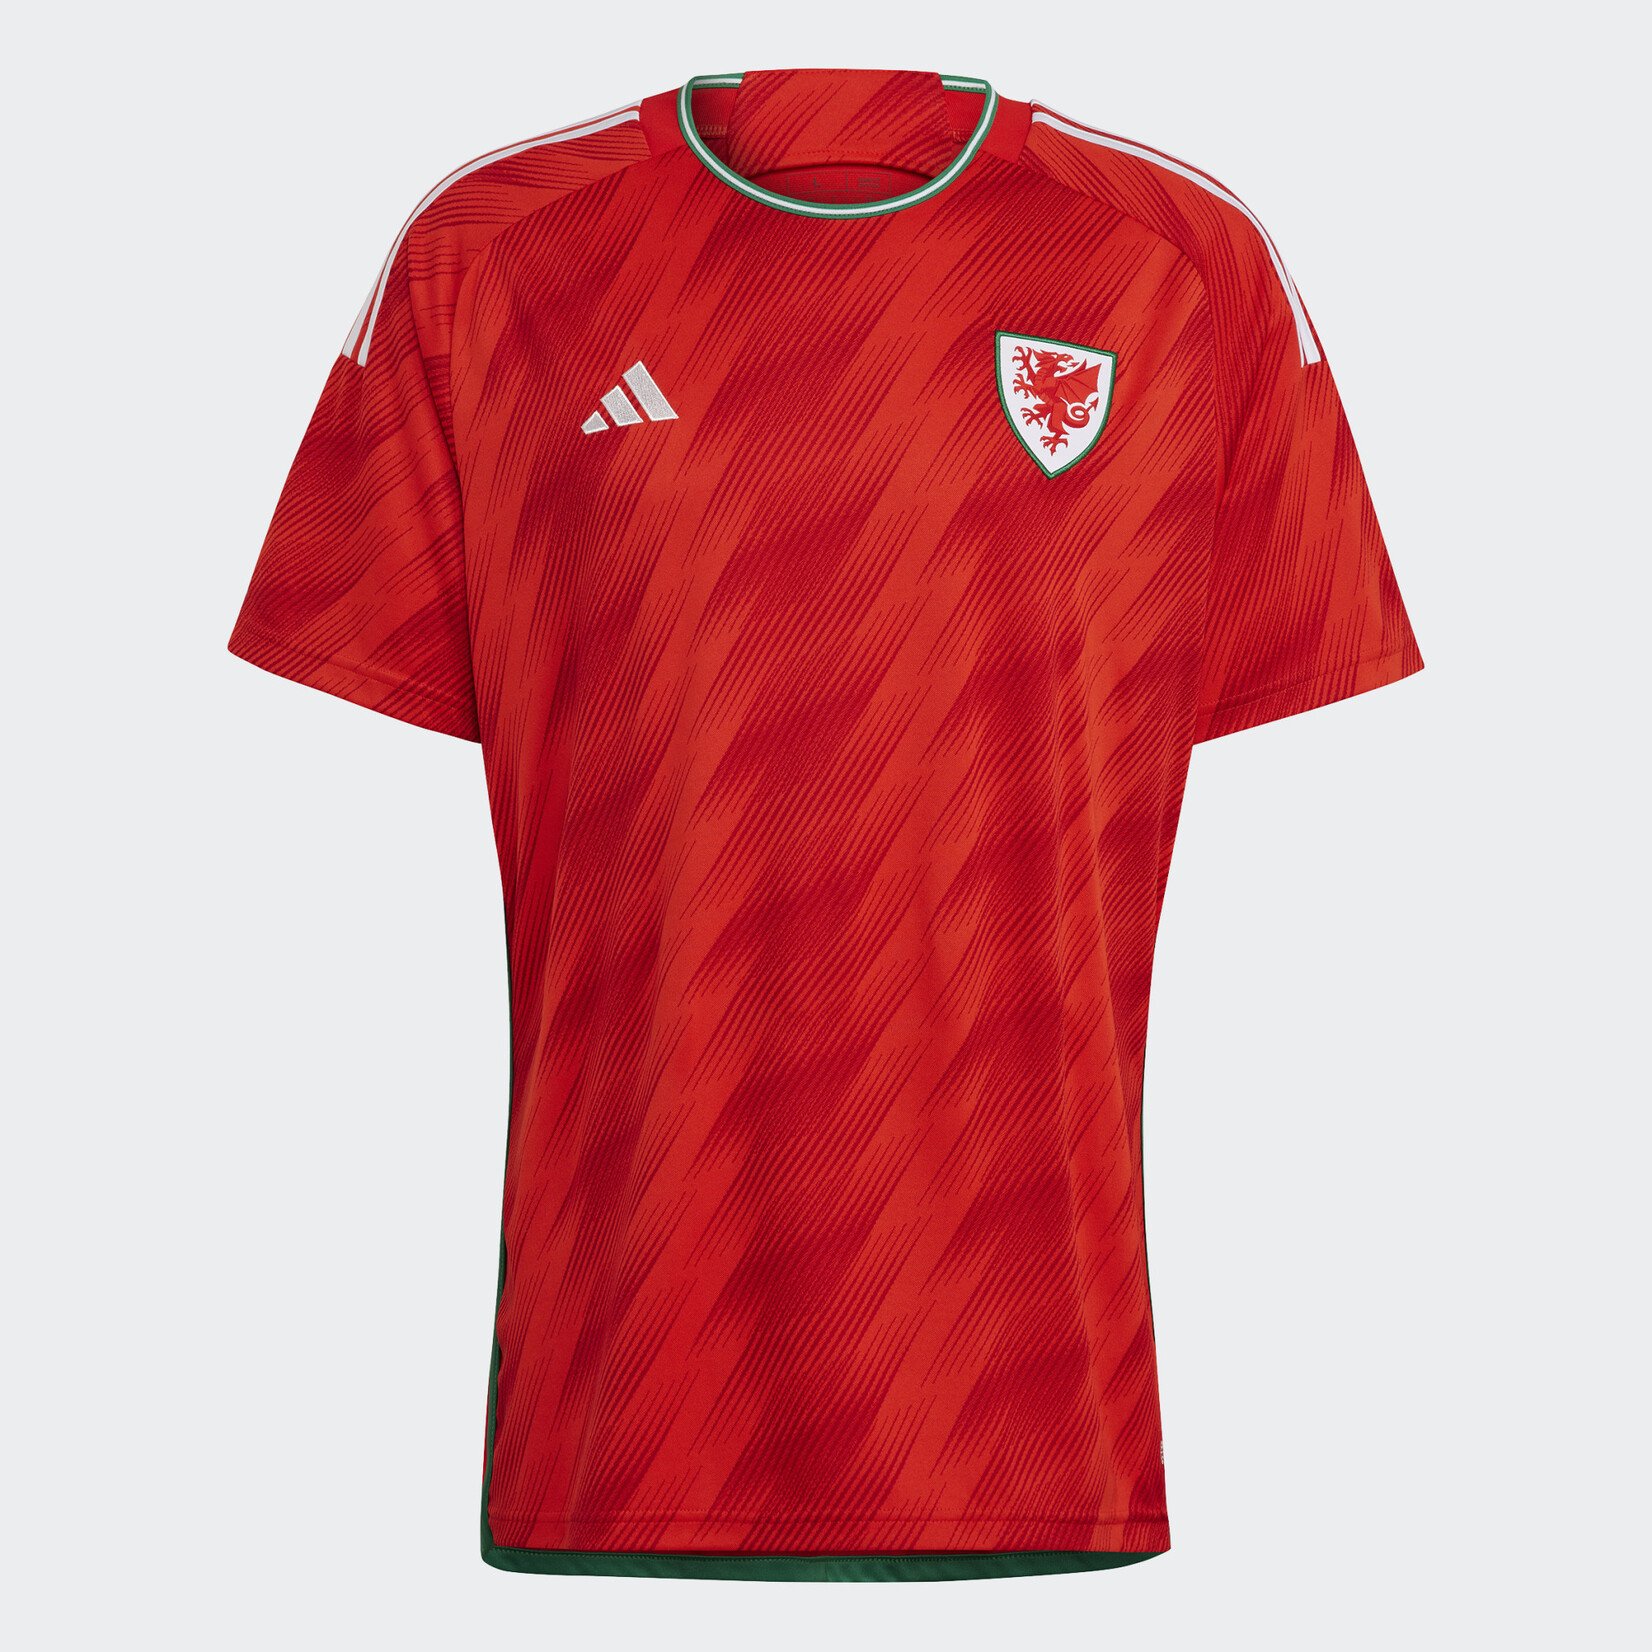 Adidas Wales 22 Home Jersey